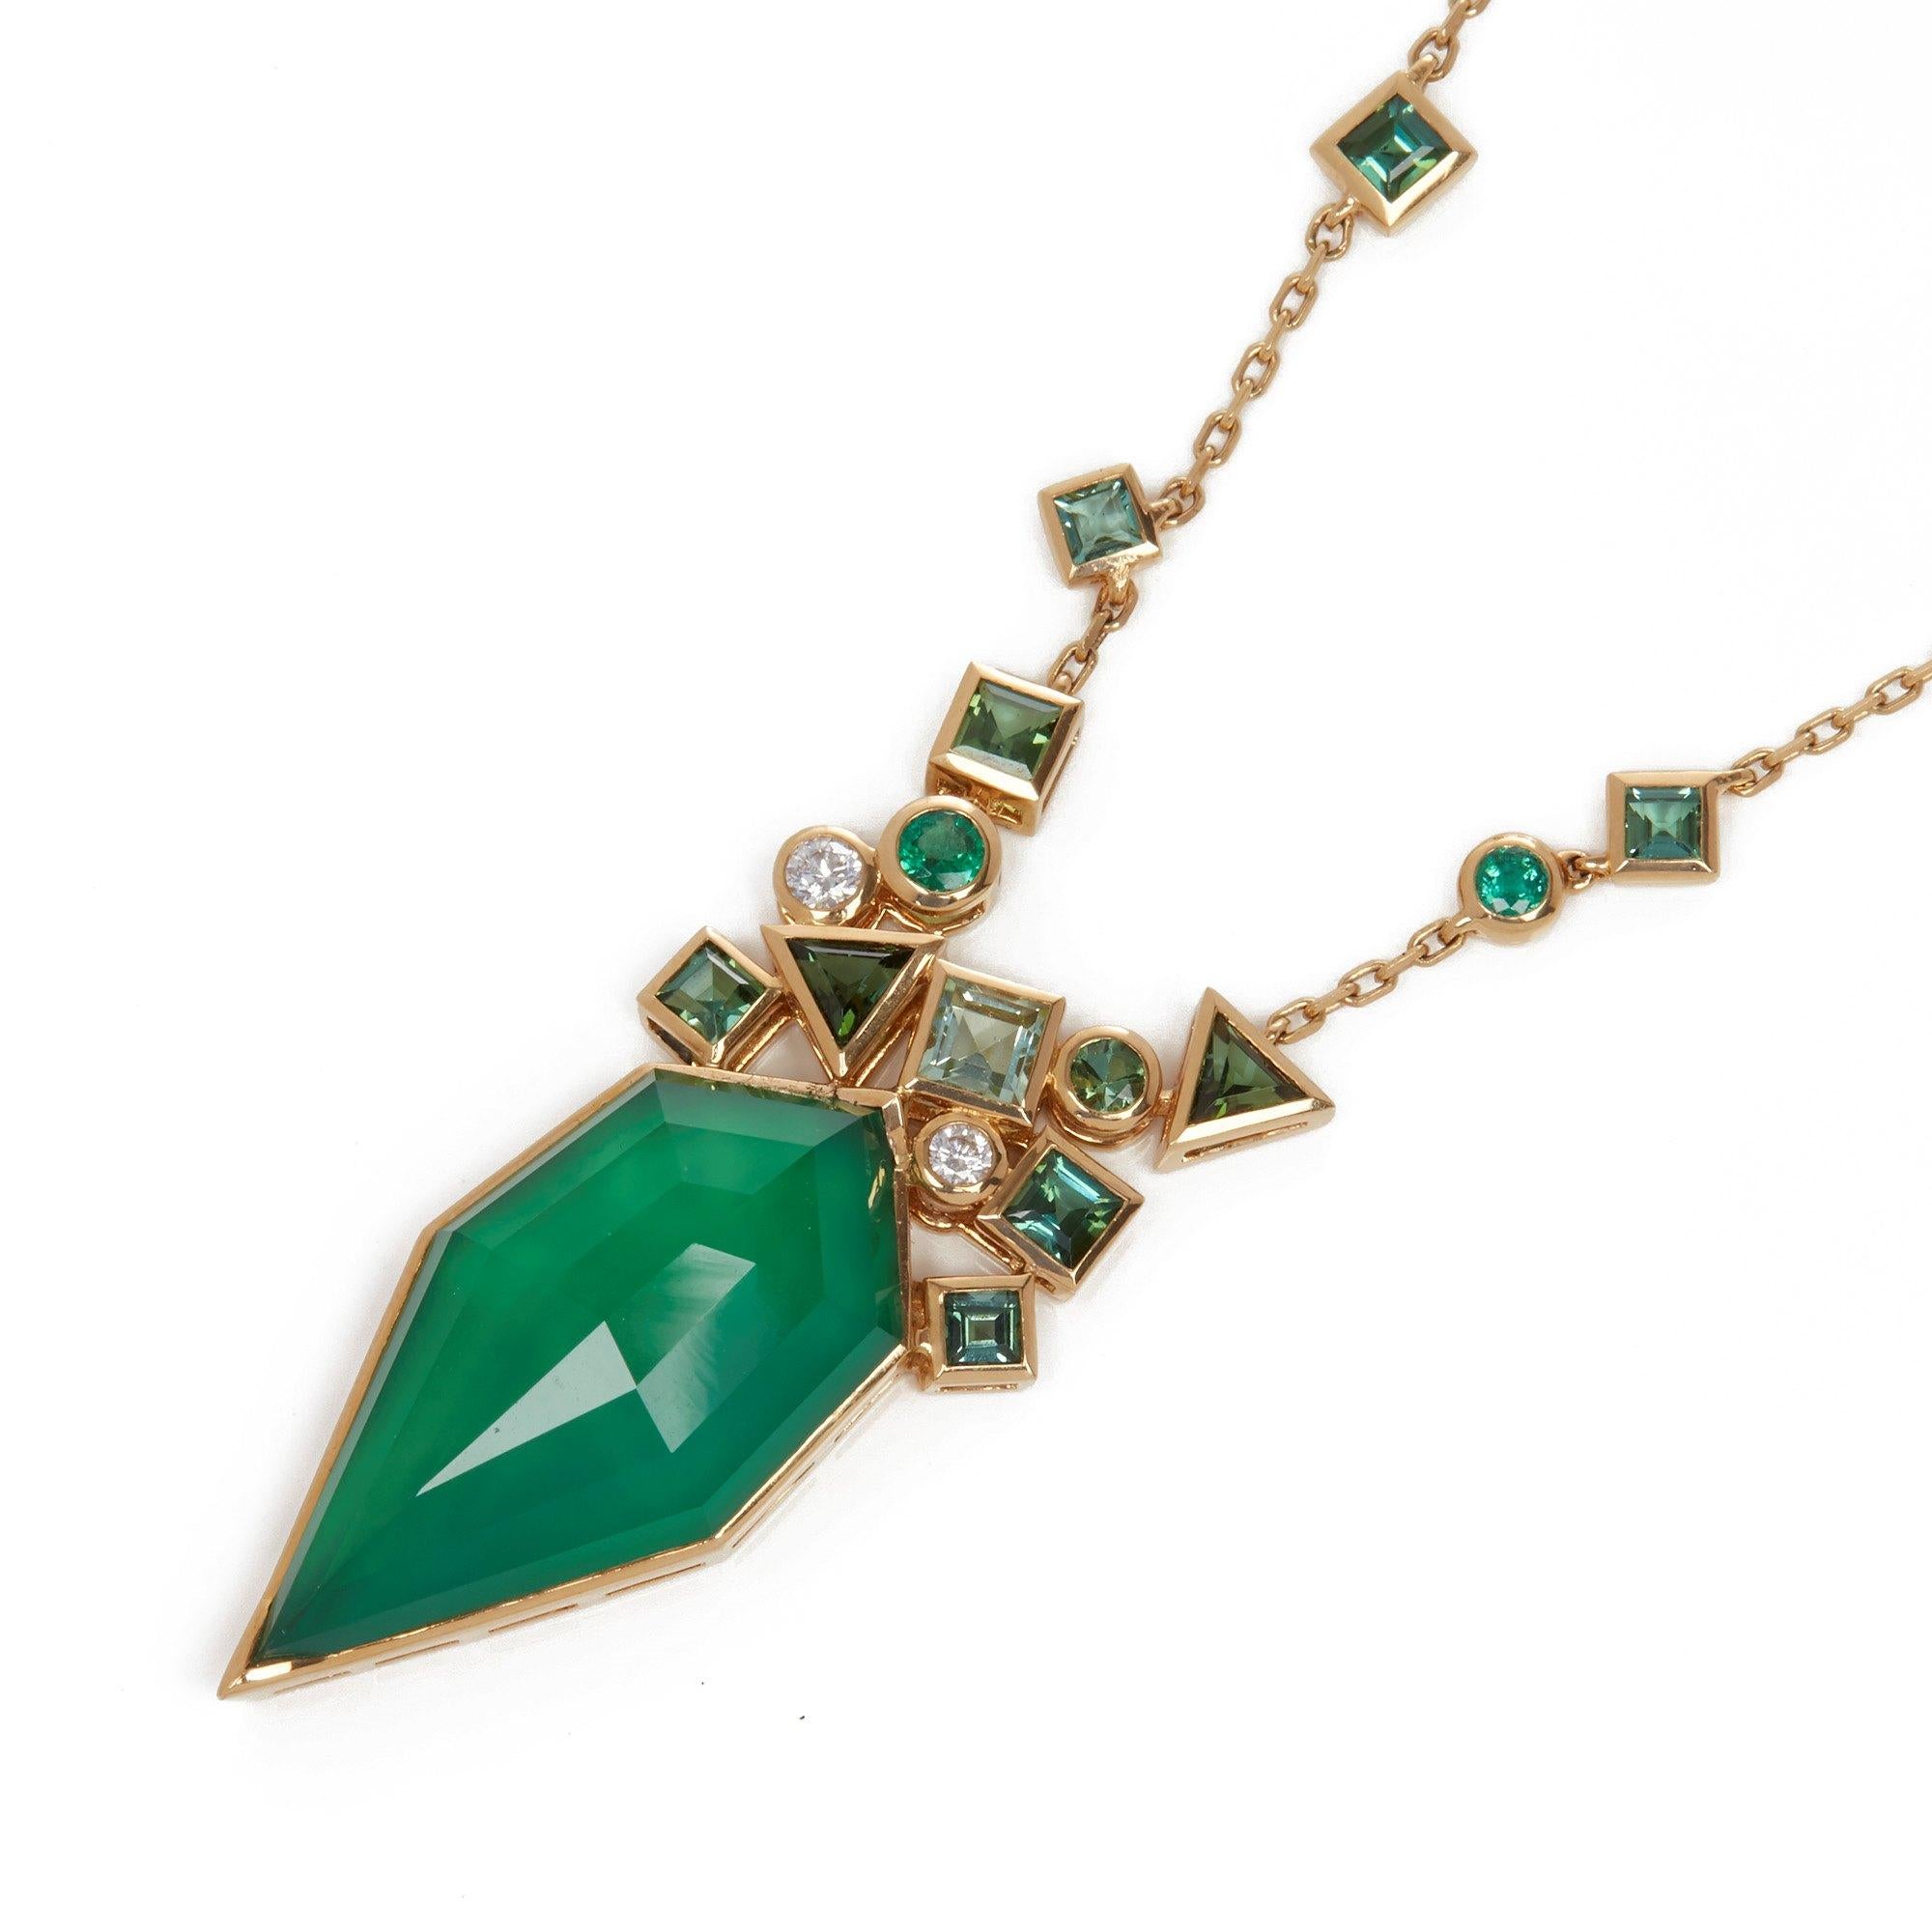 This Pendant by Stephen Webster is from his Crystal Haze Gold Struck Collection and features a Green Agate surrounded by mixed cut Green Tourmaline and Round Brilliant Cut Diamonds. With 76cm Trace Chain. Set in 18k Yellow Gold.